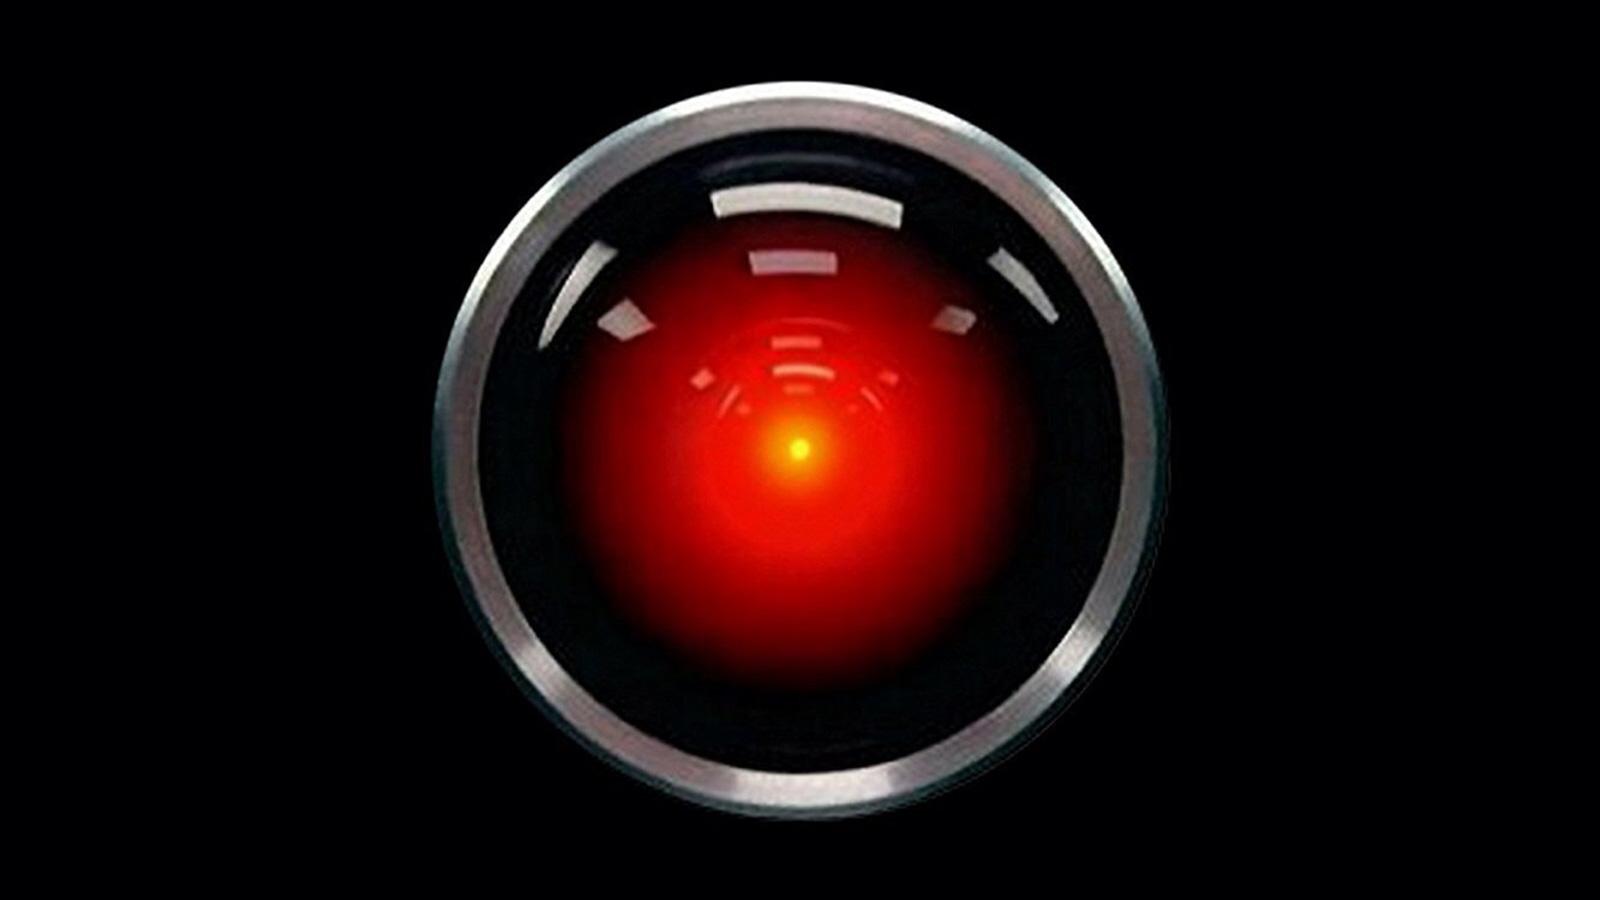 Image of HAL from 2001 A Space Odyssey